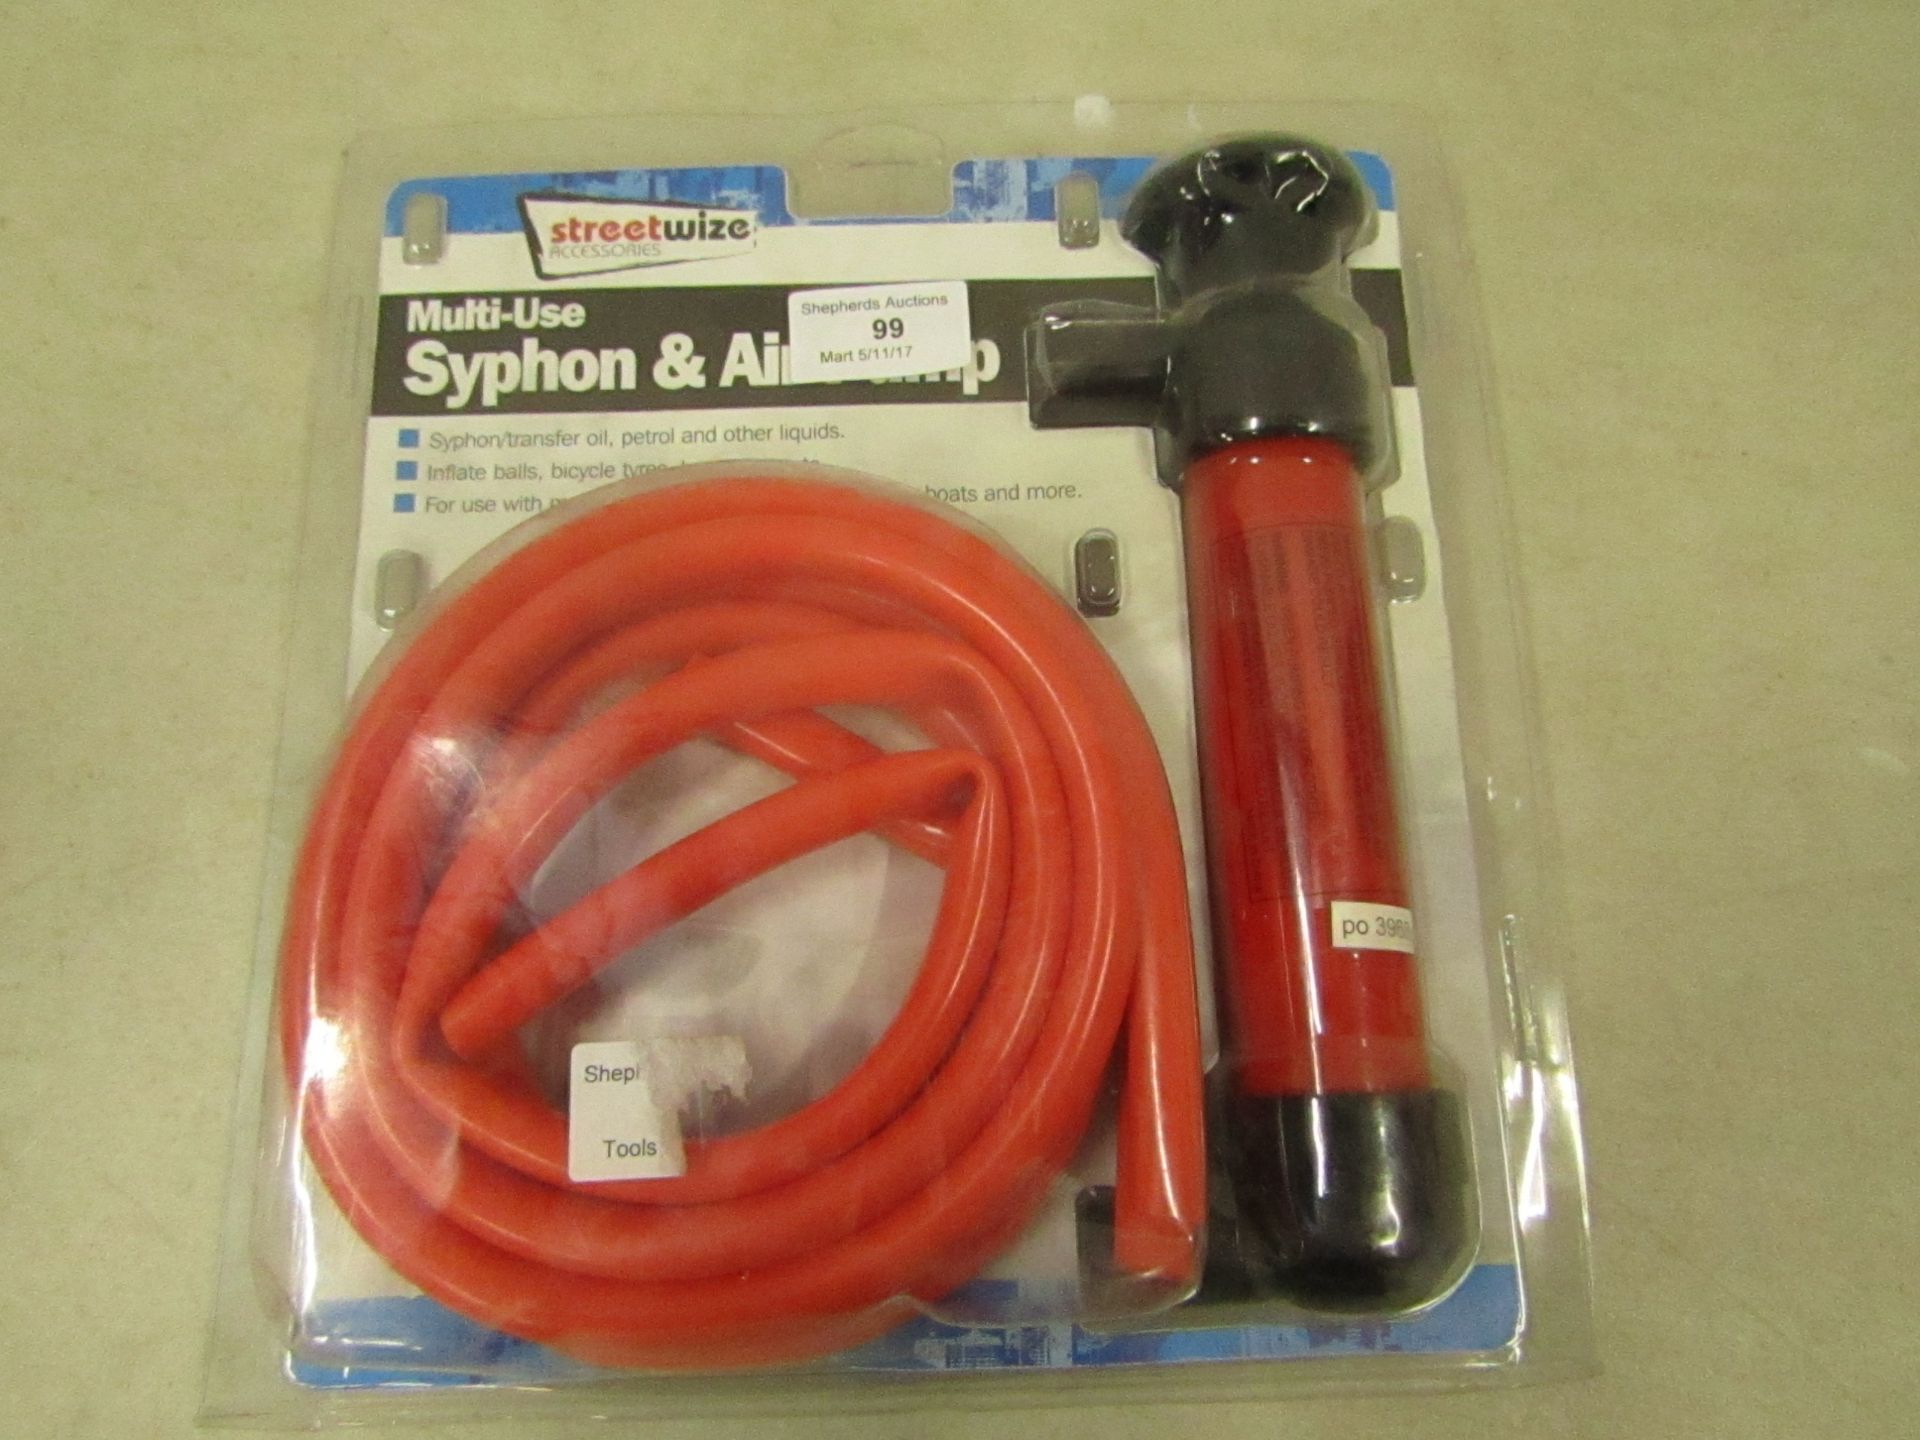 Multi use syphon and air pump, packaged.